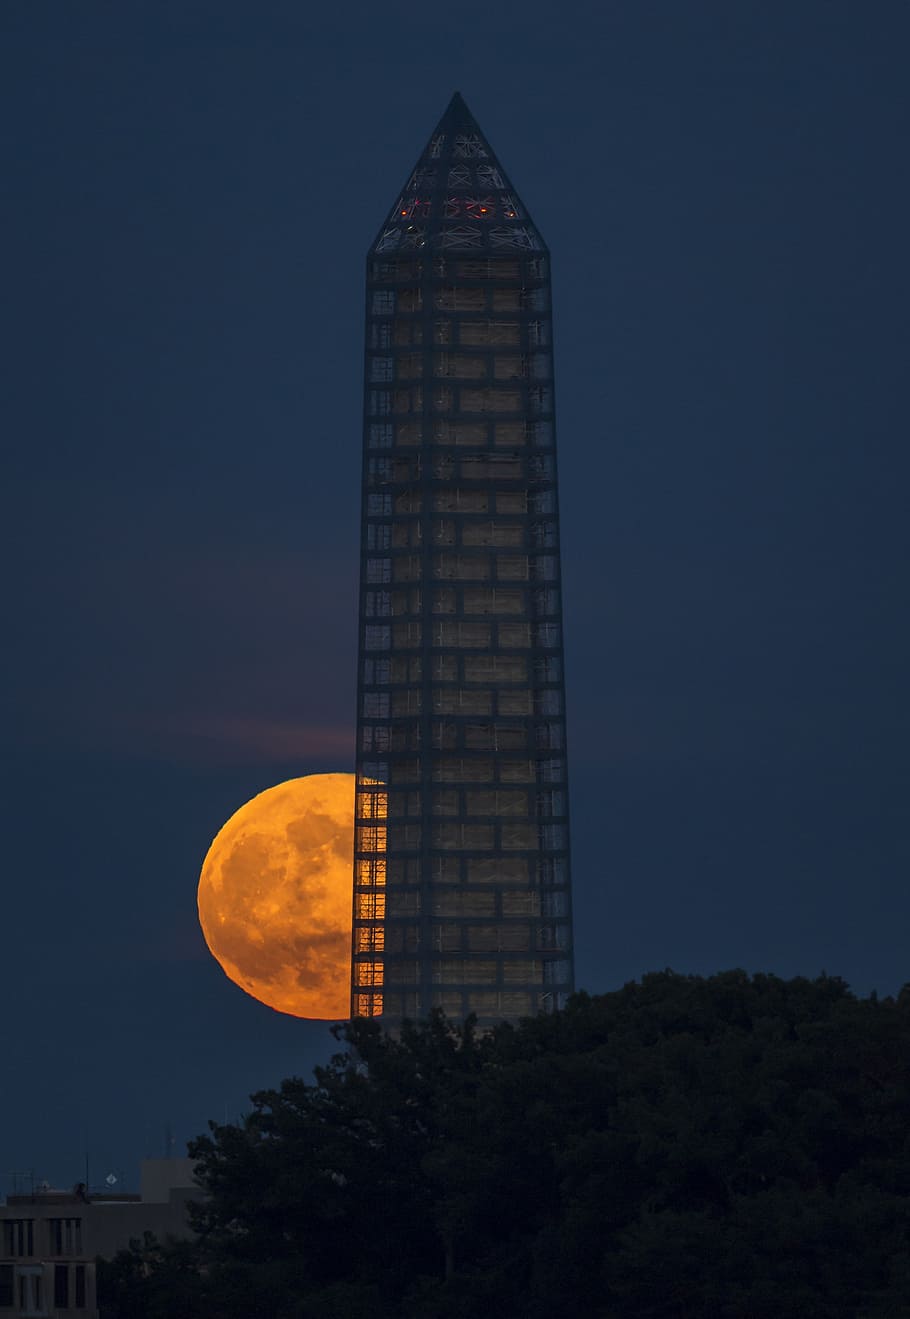 supermoon, full, perigee, night, washington monument, glowing, bright, light, clouds, district of columbia